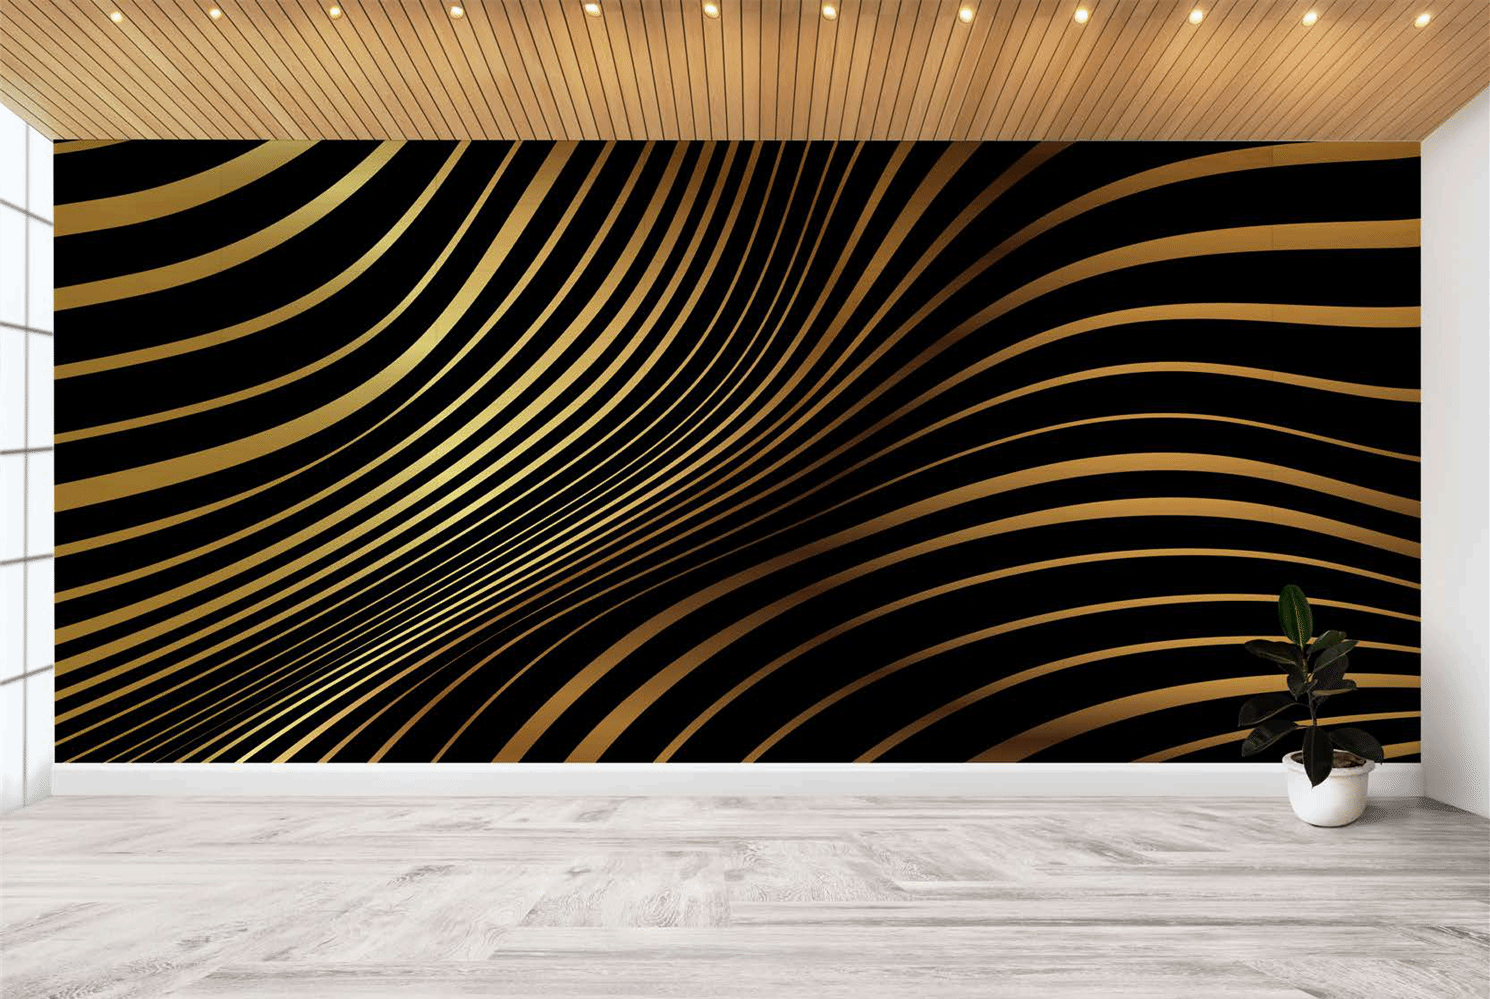 Black & Gold Wall-Paper